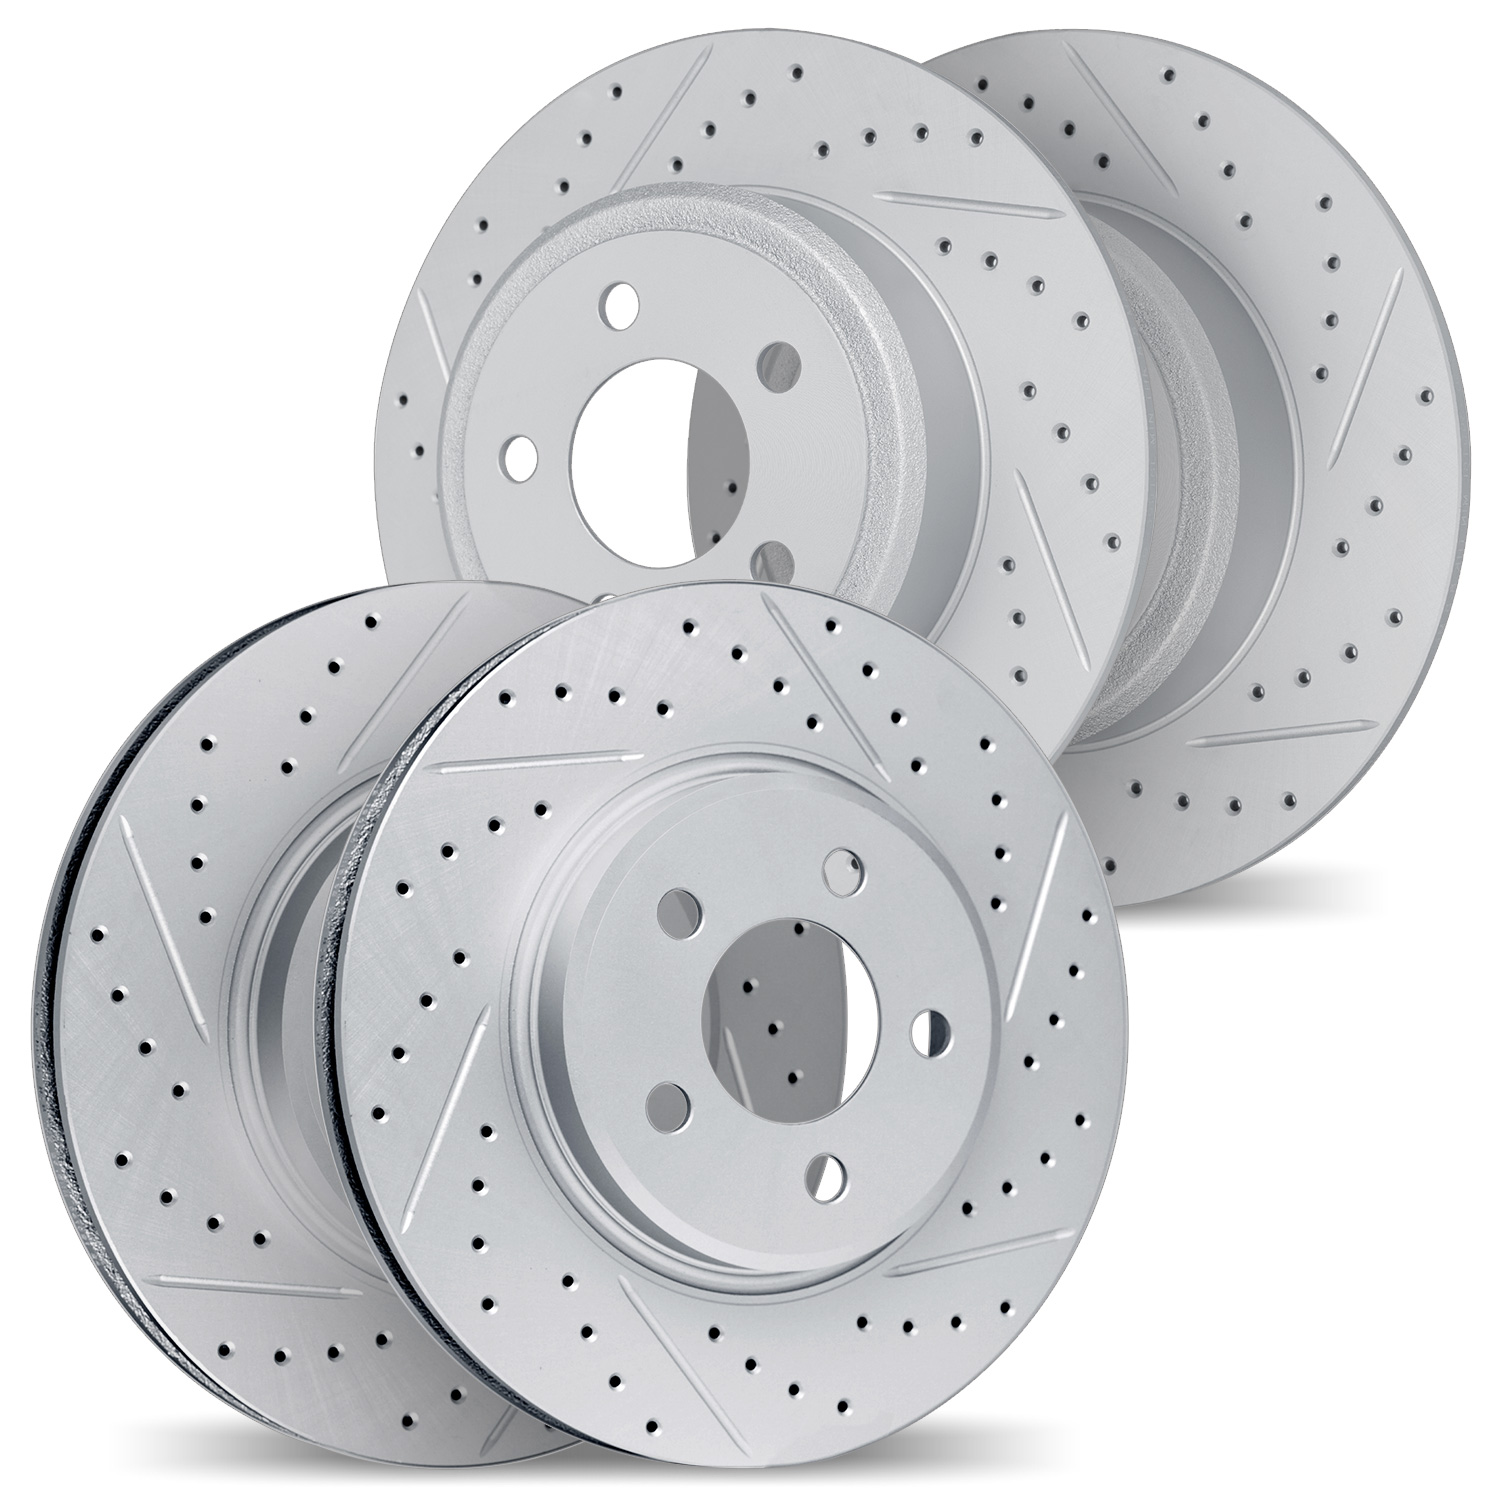 2004-32012 Geoperformance Drilled/Slotted Brake Rotors, Fits Select Mini, Position: Front and Rear